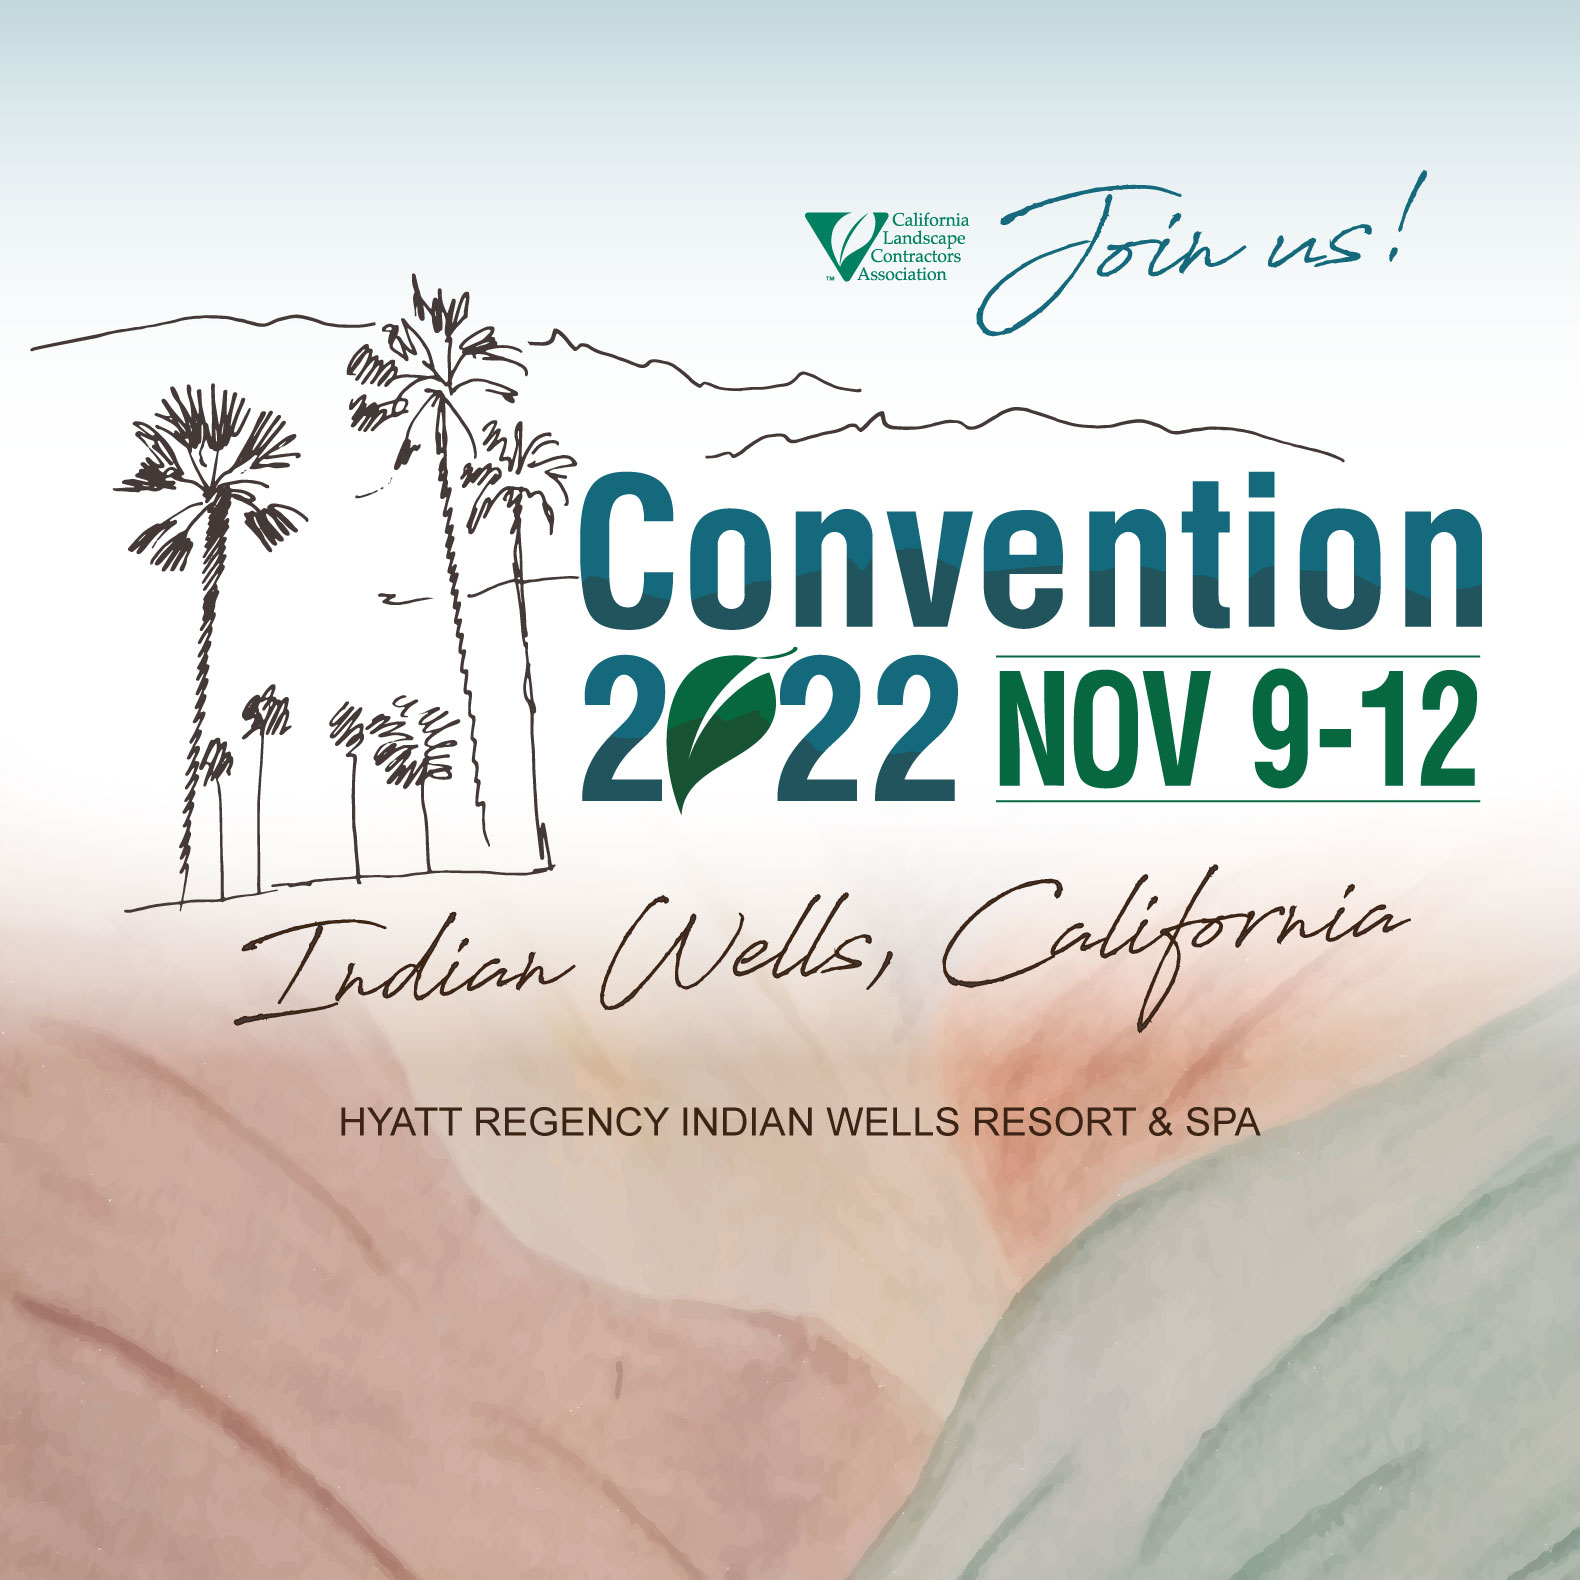 Save the date for CLCA's 2022 Annual Convention: November 9-12